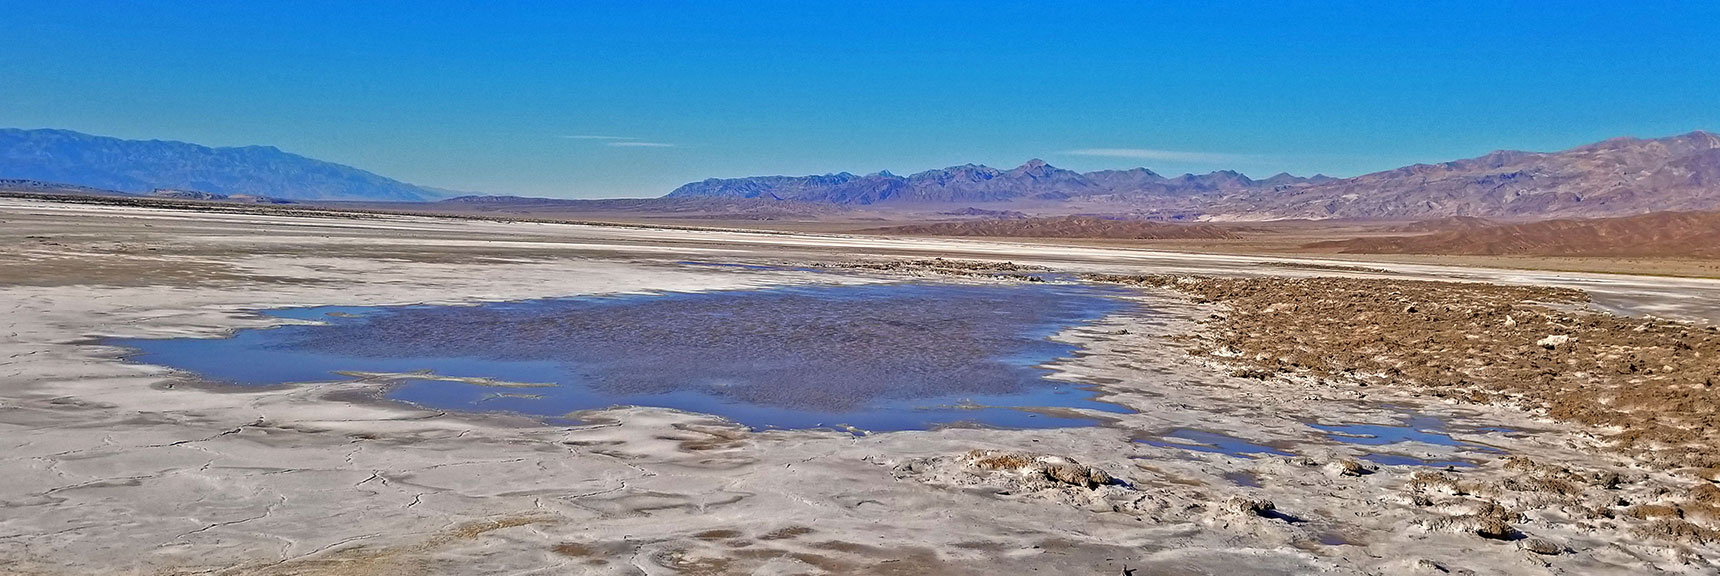 Small Pool Surrounded by White Borates. | Return of Lake Manly (Lake in Death Valley) | Death Valley National Park, California